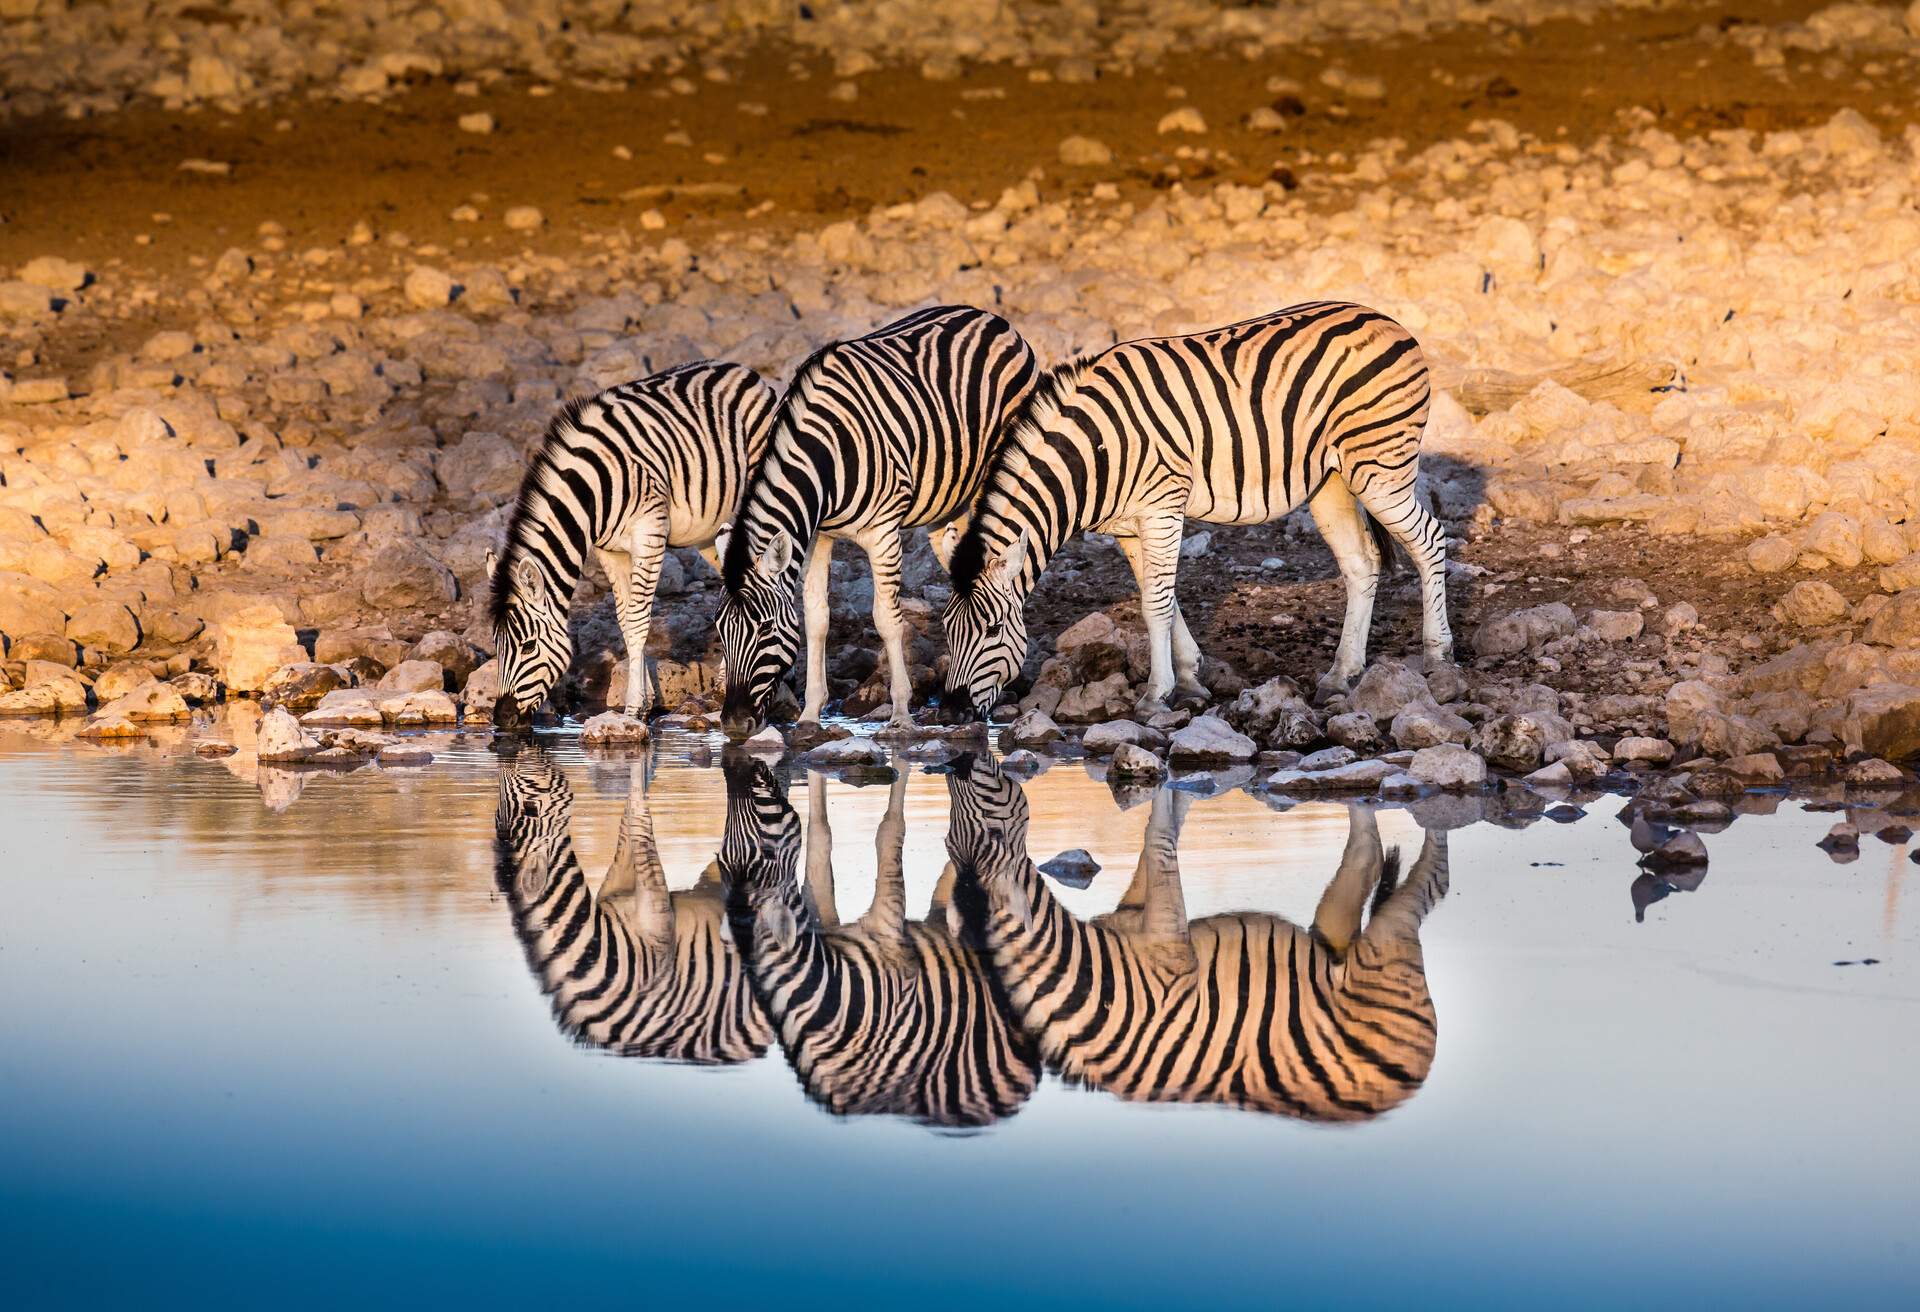 Reflection of a group of Burchell's zebras while drinking in a waterhole in Etosha National Park